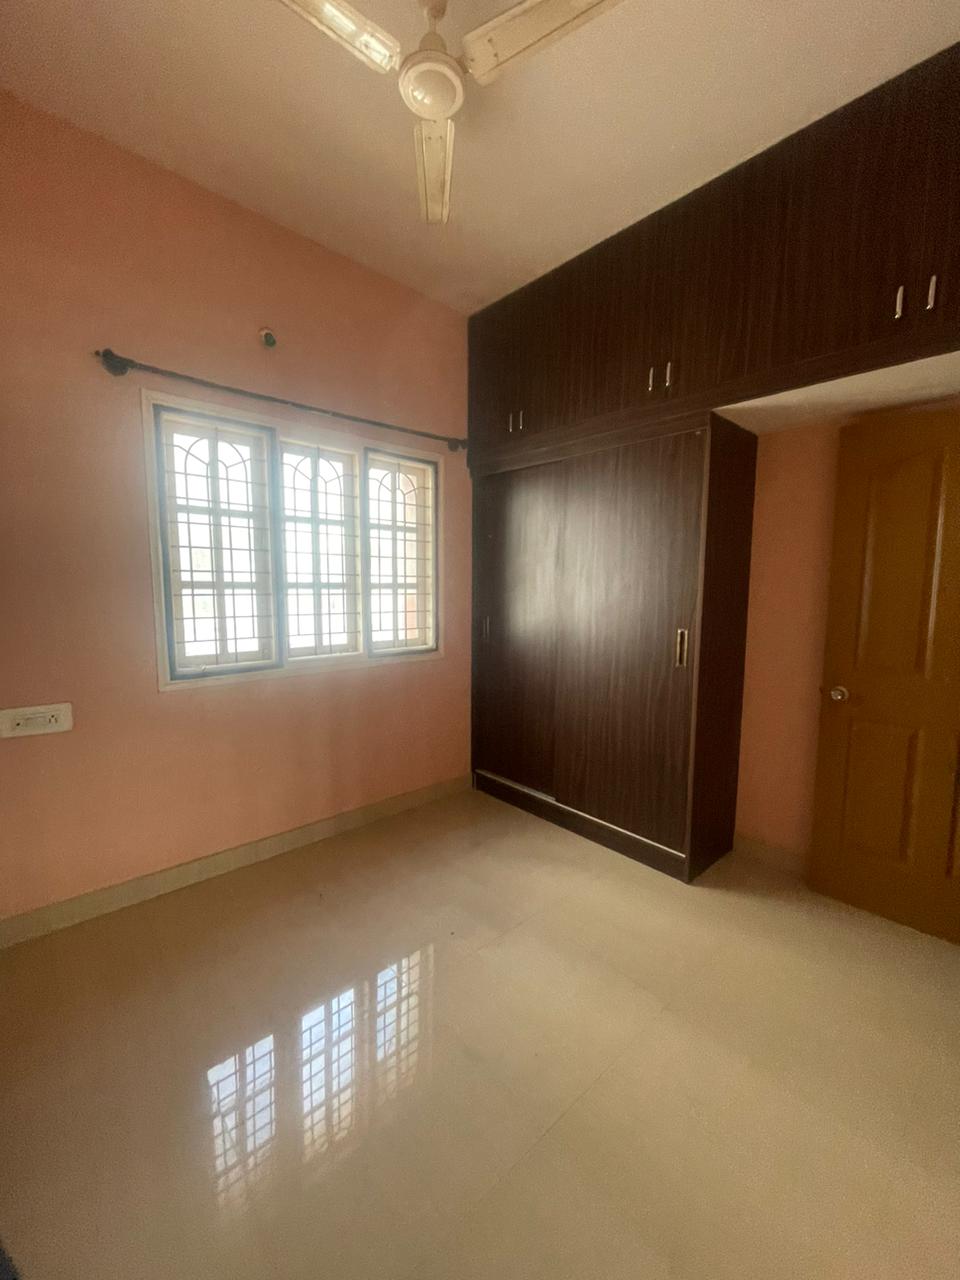 2 BHK Independent House for Lease Only at JAML2 - 973 in Hebbal Kempapura